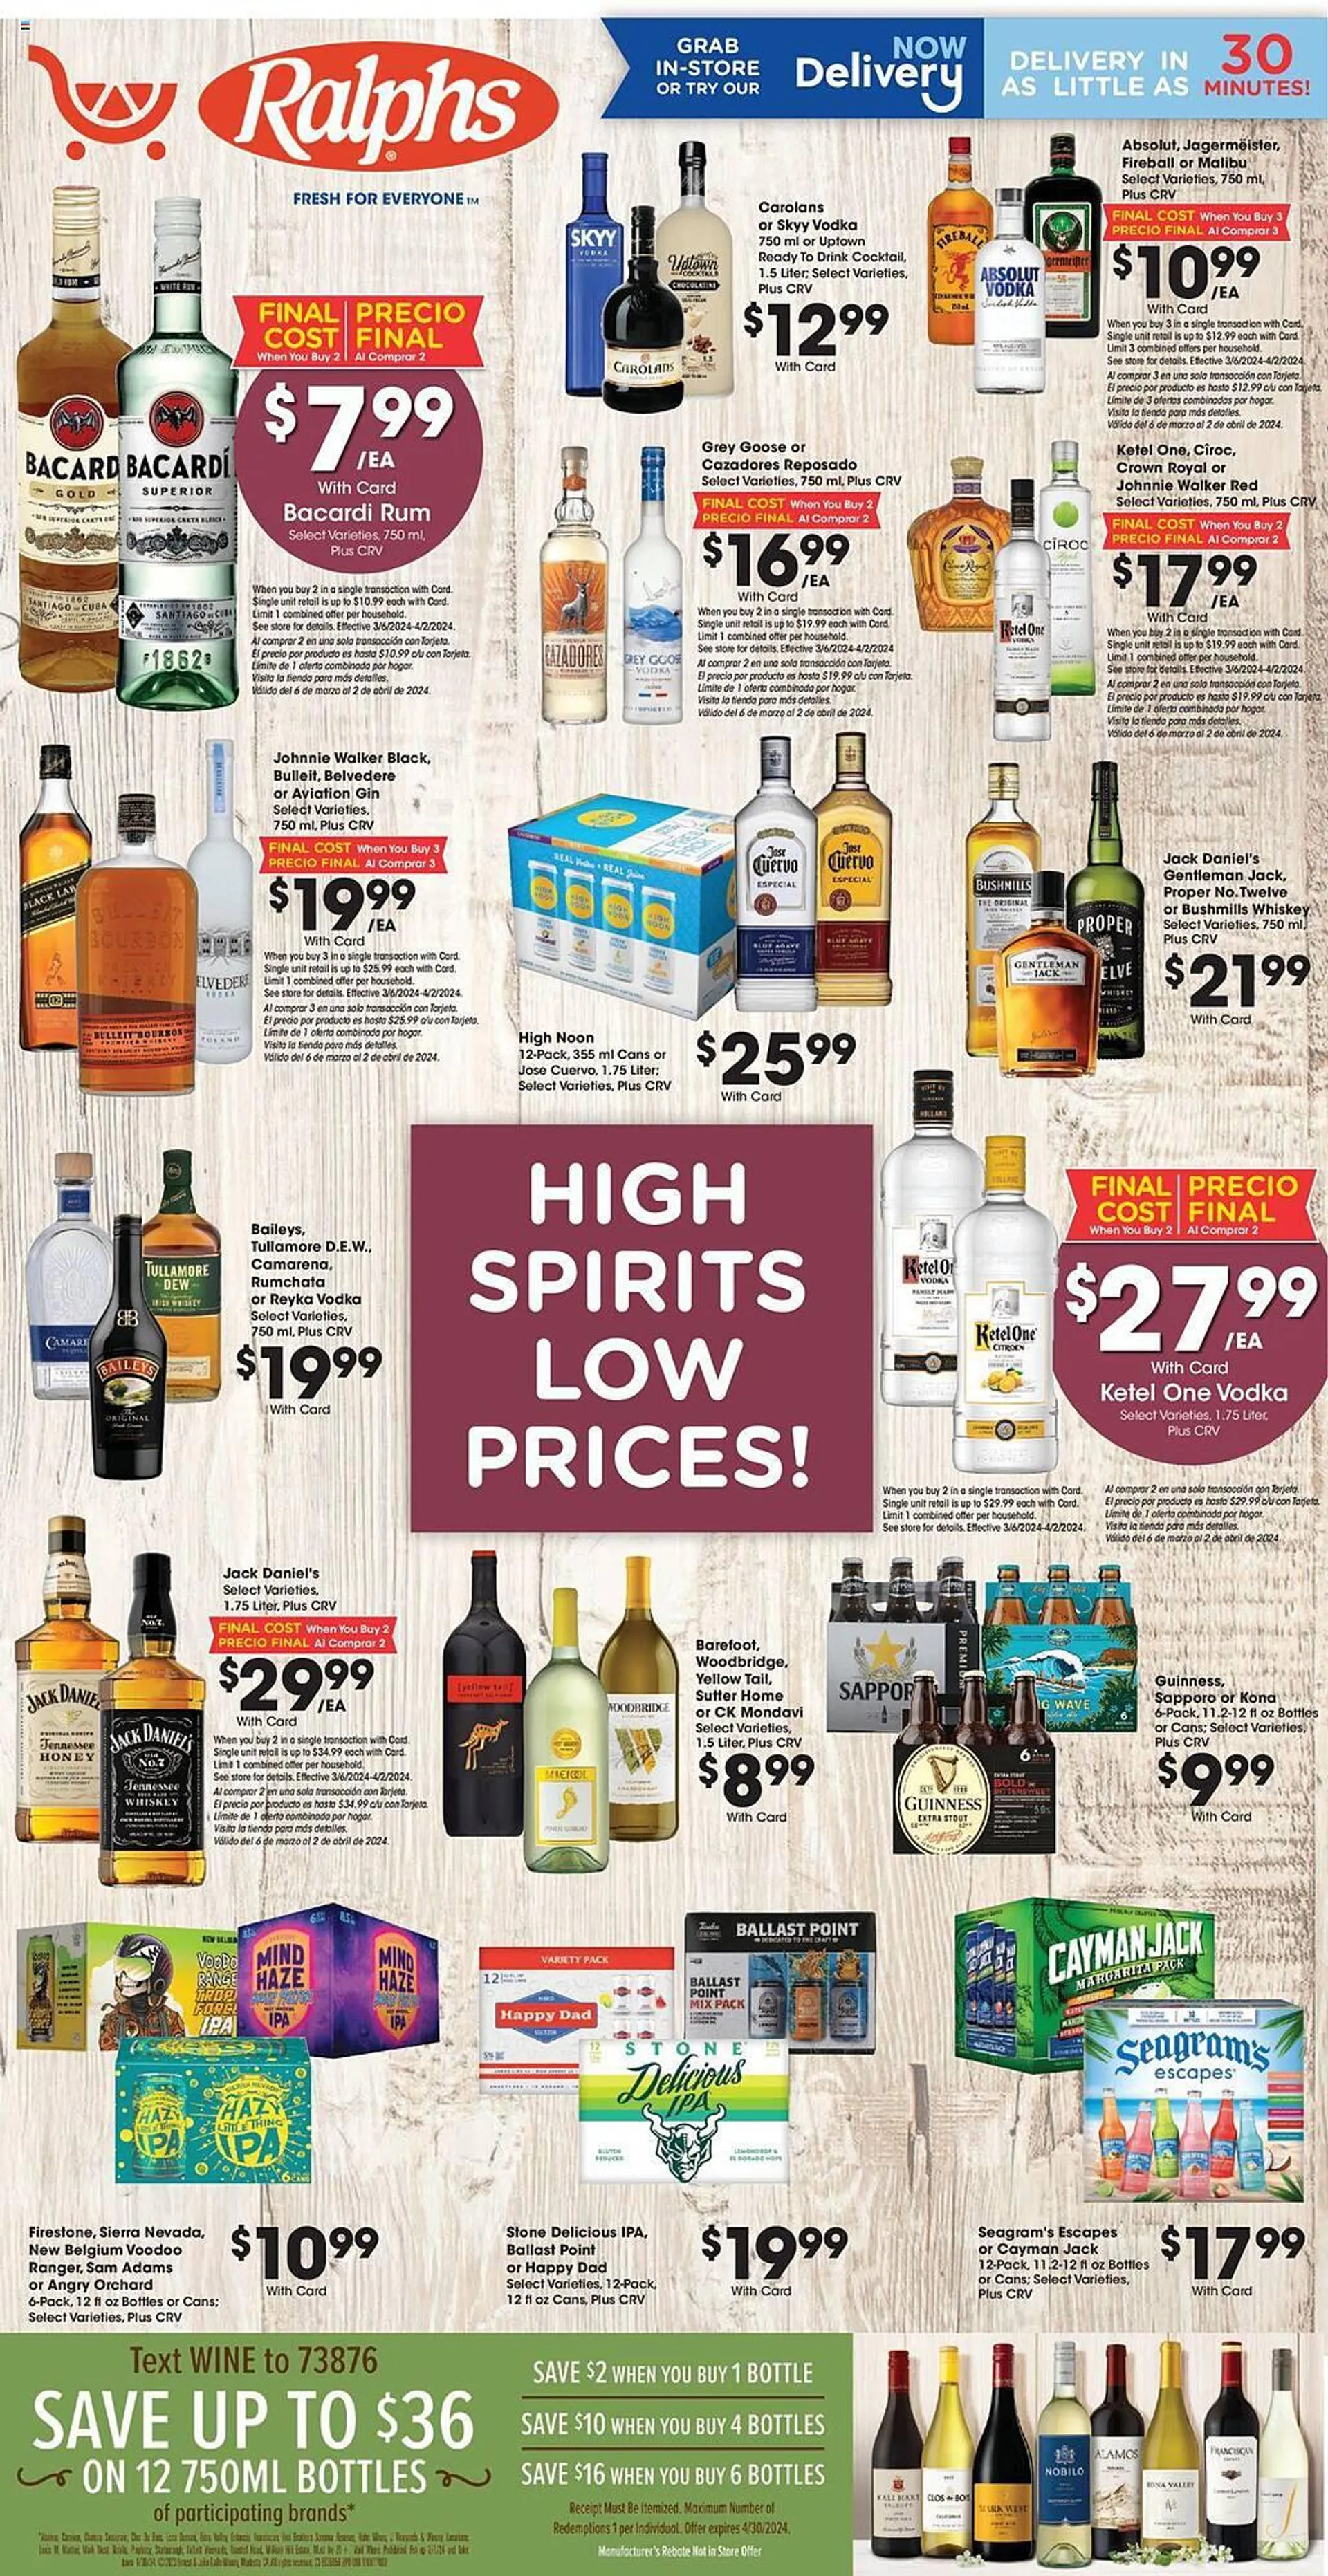 Weekly ad Ralphs Weekly Ad from March 20 to March 26 2024 - Page 